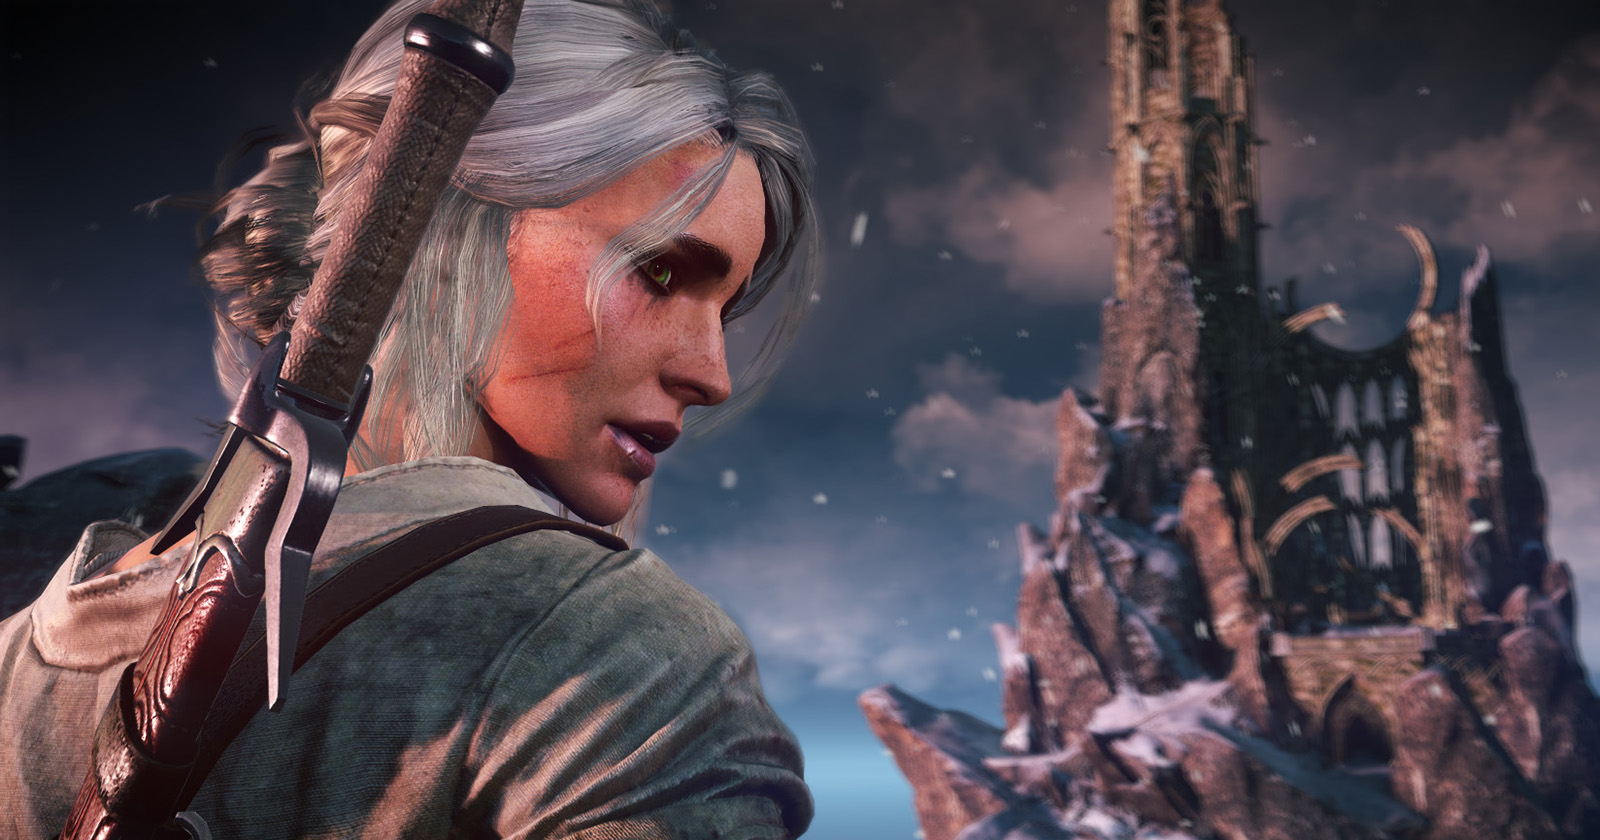 CD Projekt Red Confirms a New Witcher Game Is In Development, Will Use  Unreal Engine 5 - IGN